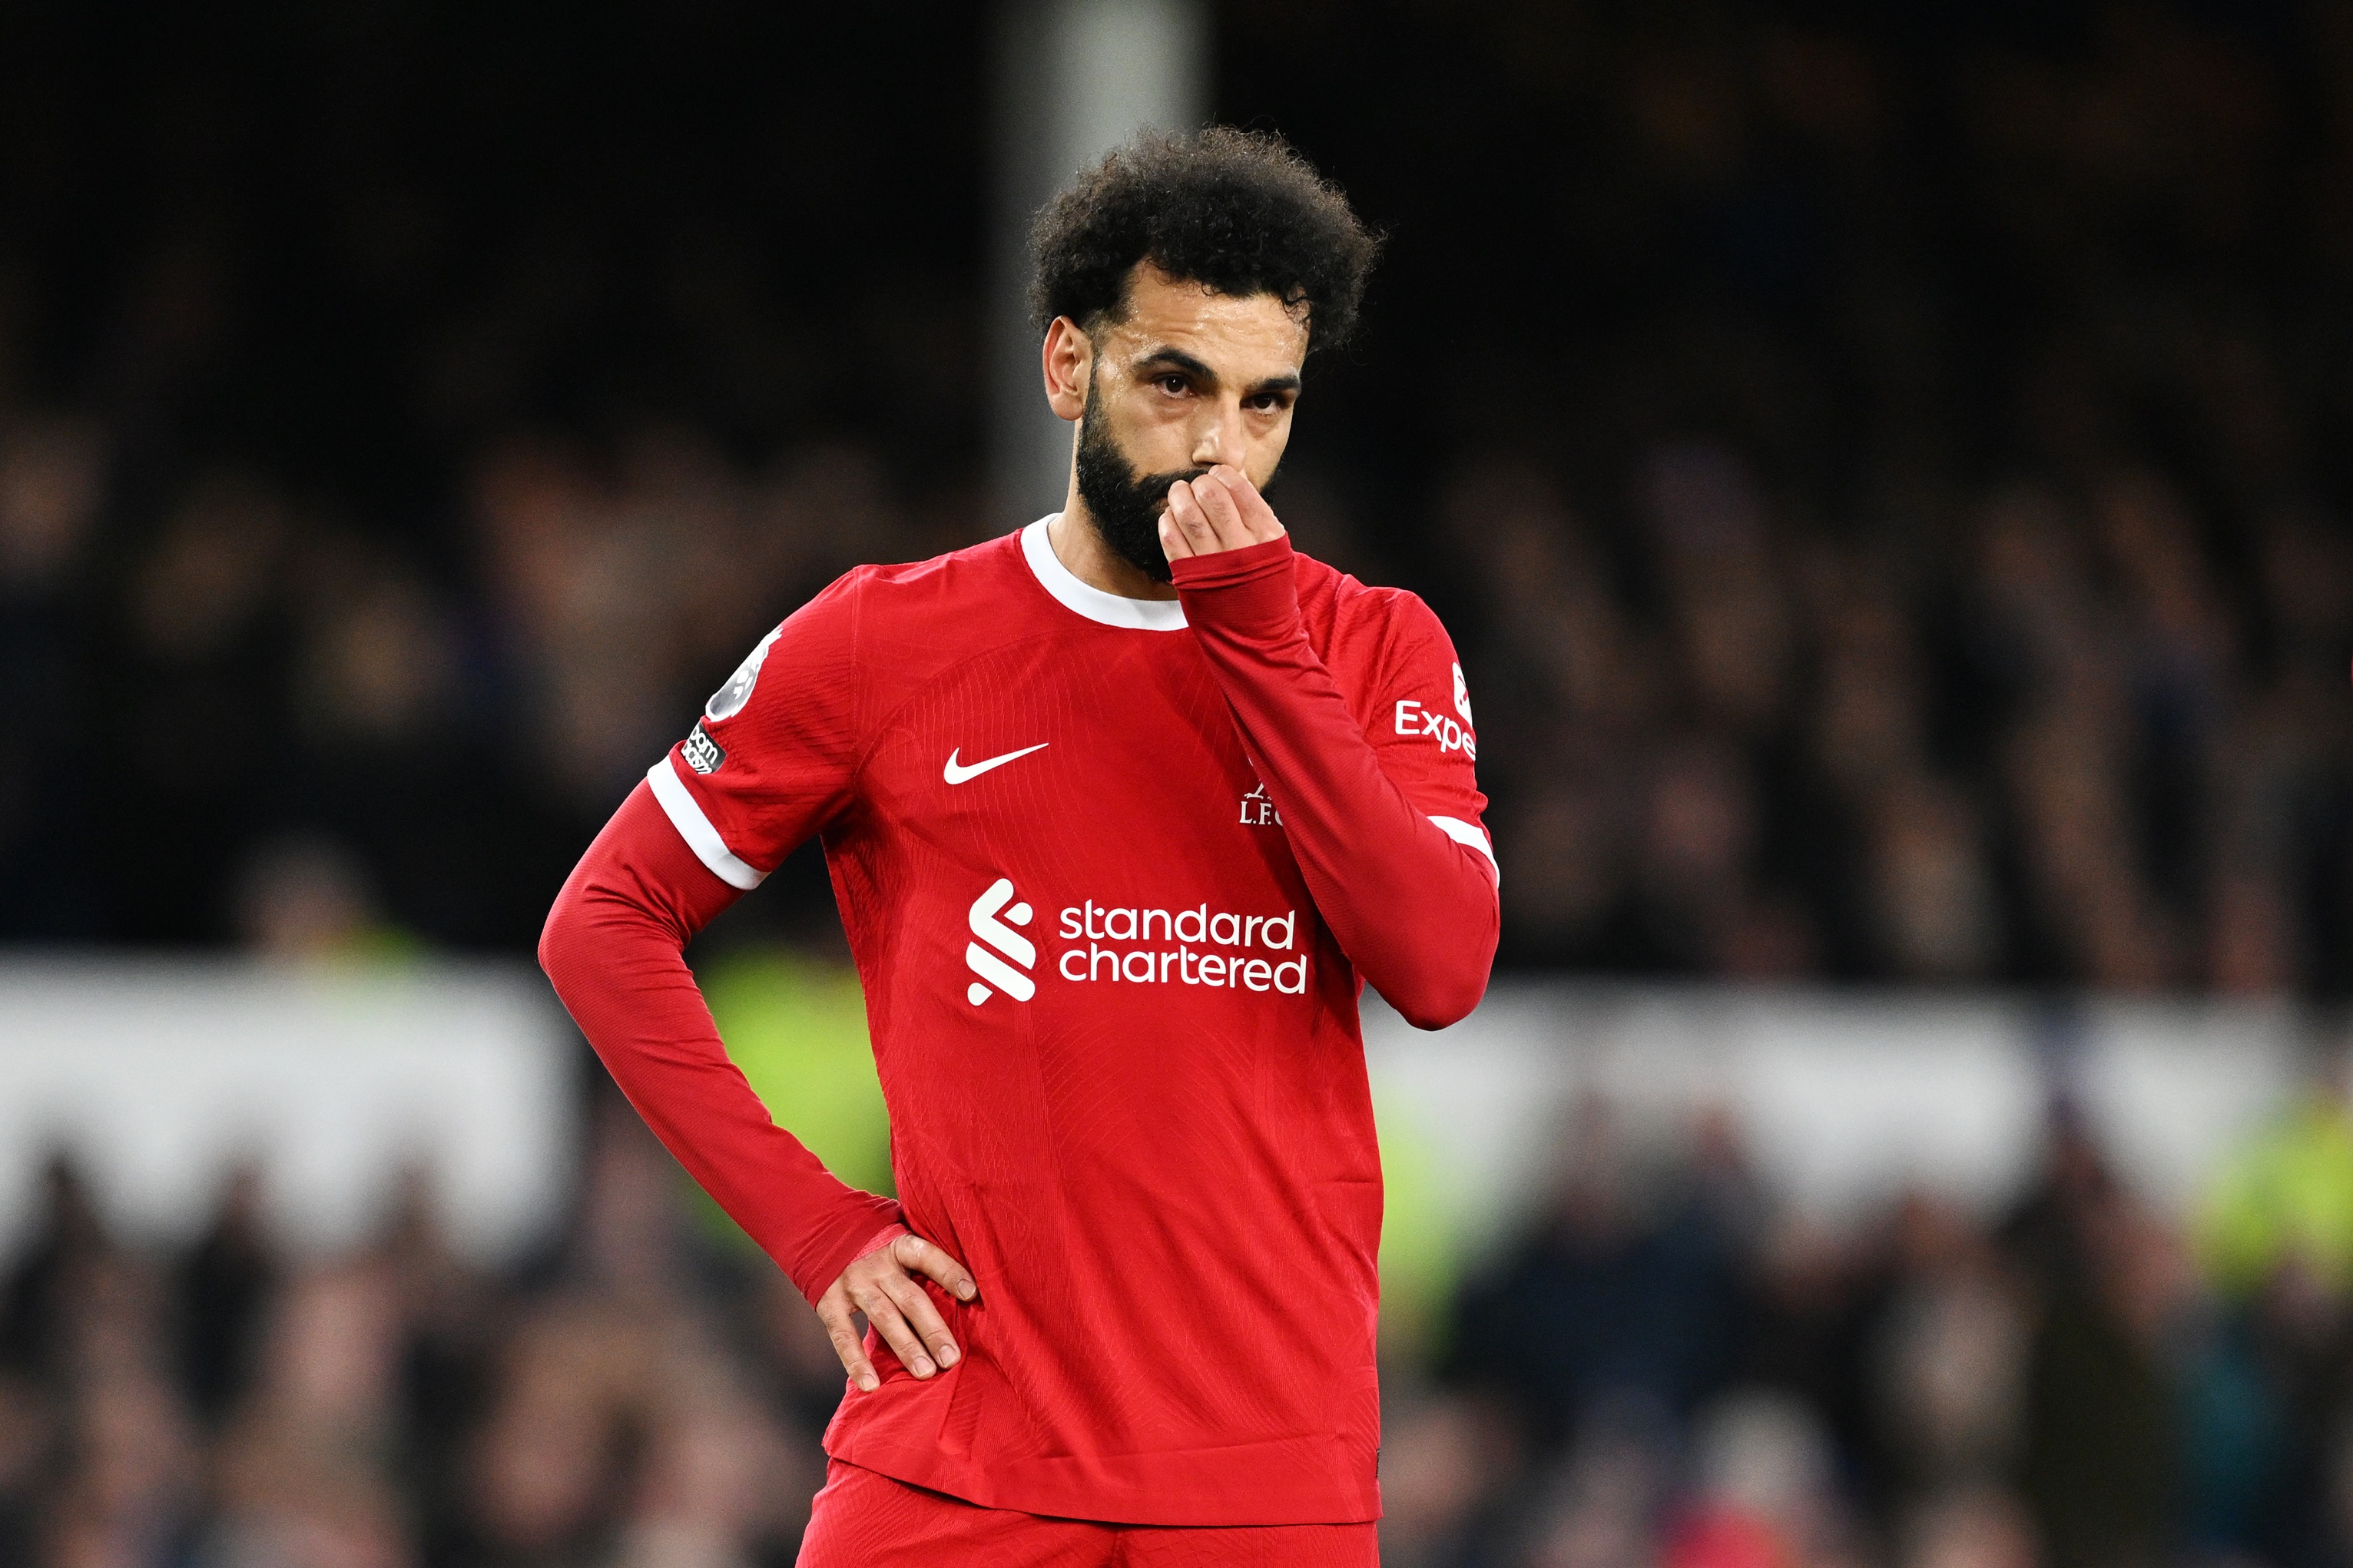 Mark Goldbridge can’t believe what’s now been said about Mo Salah live on air